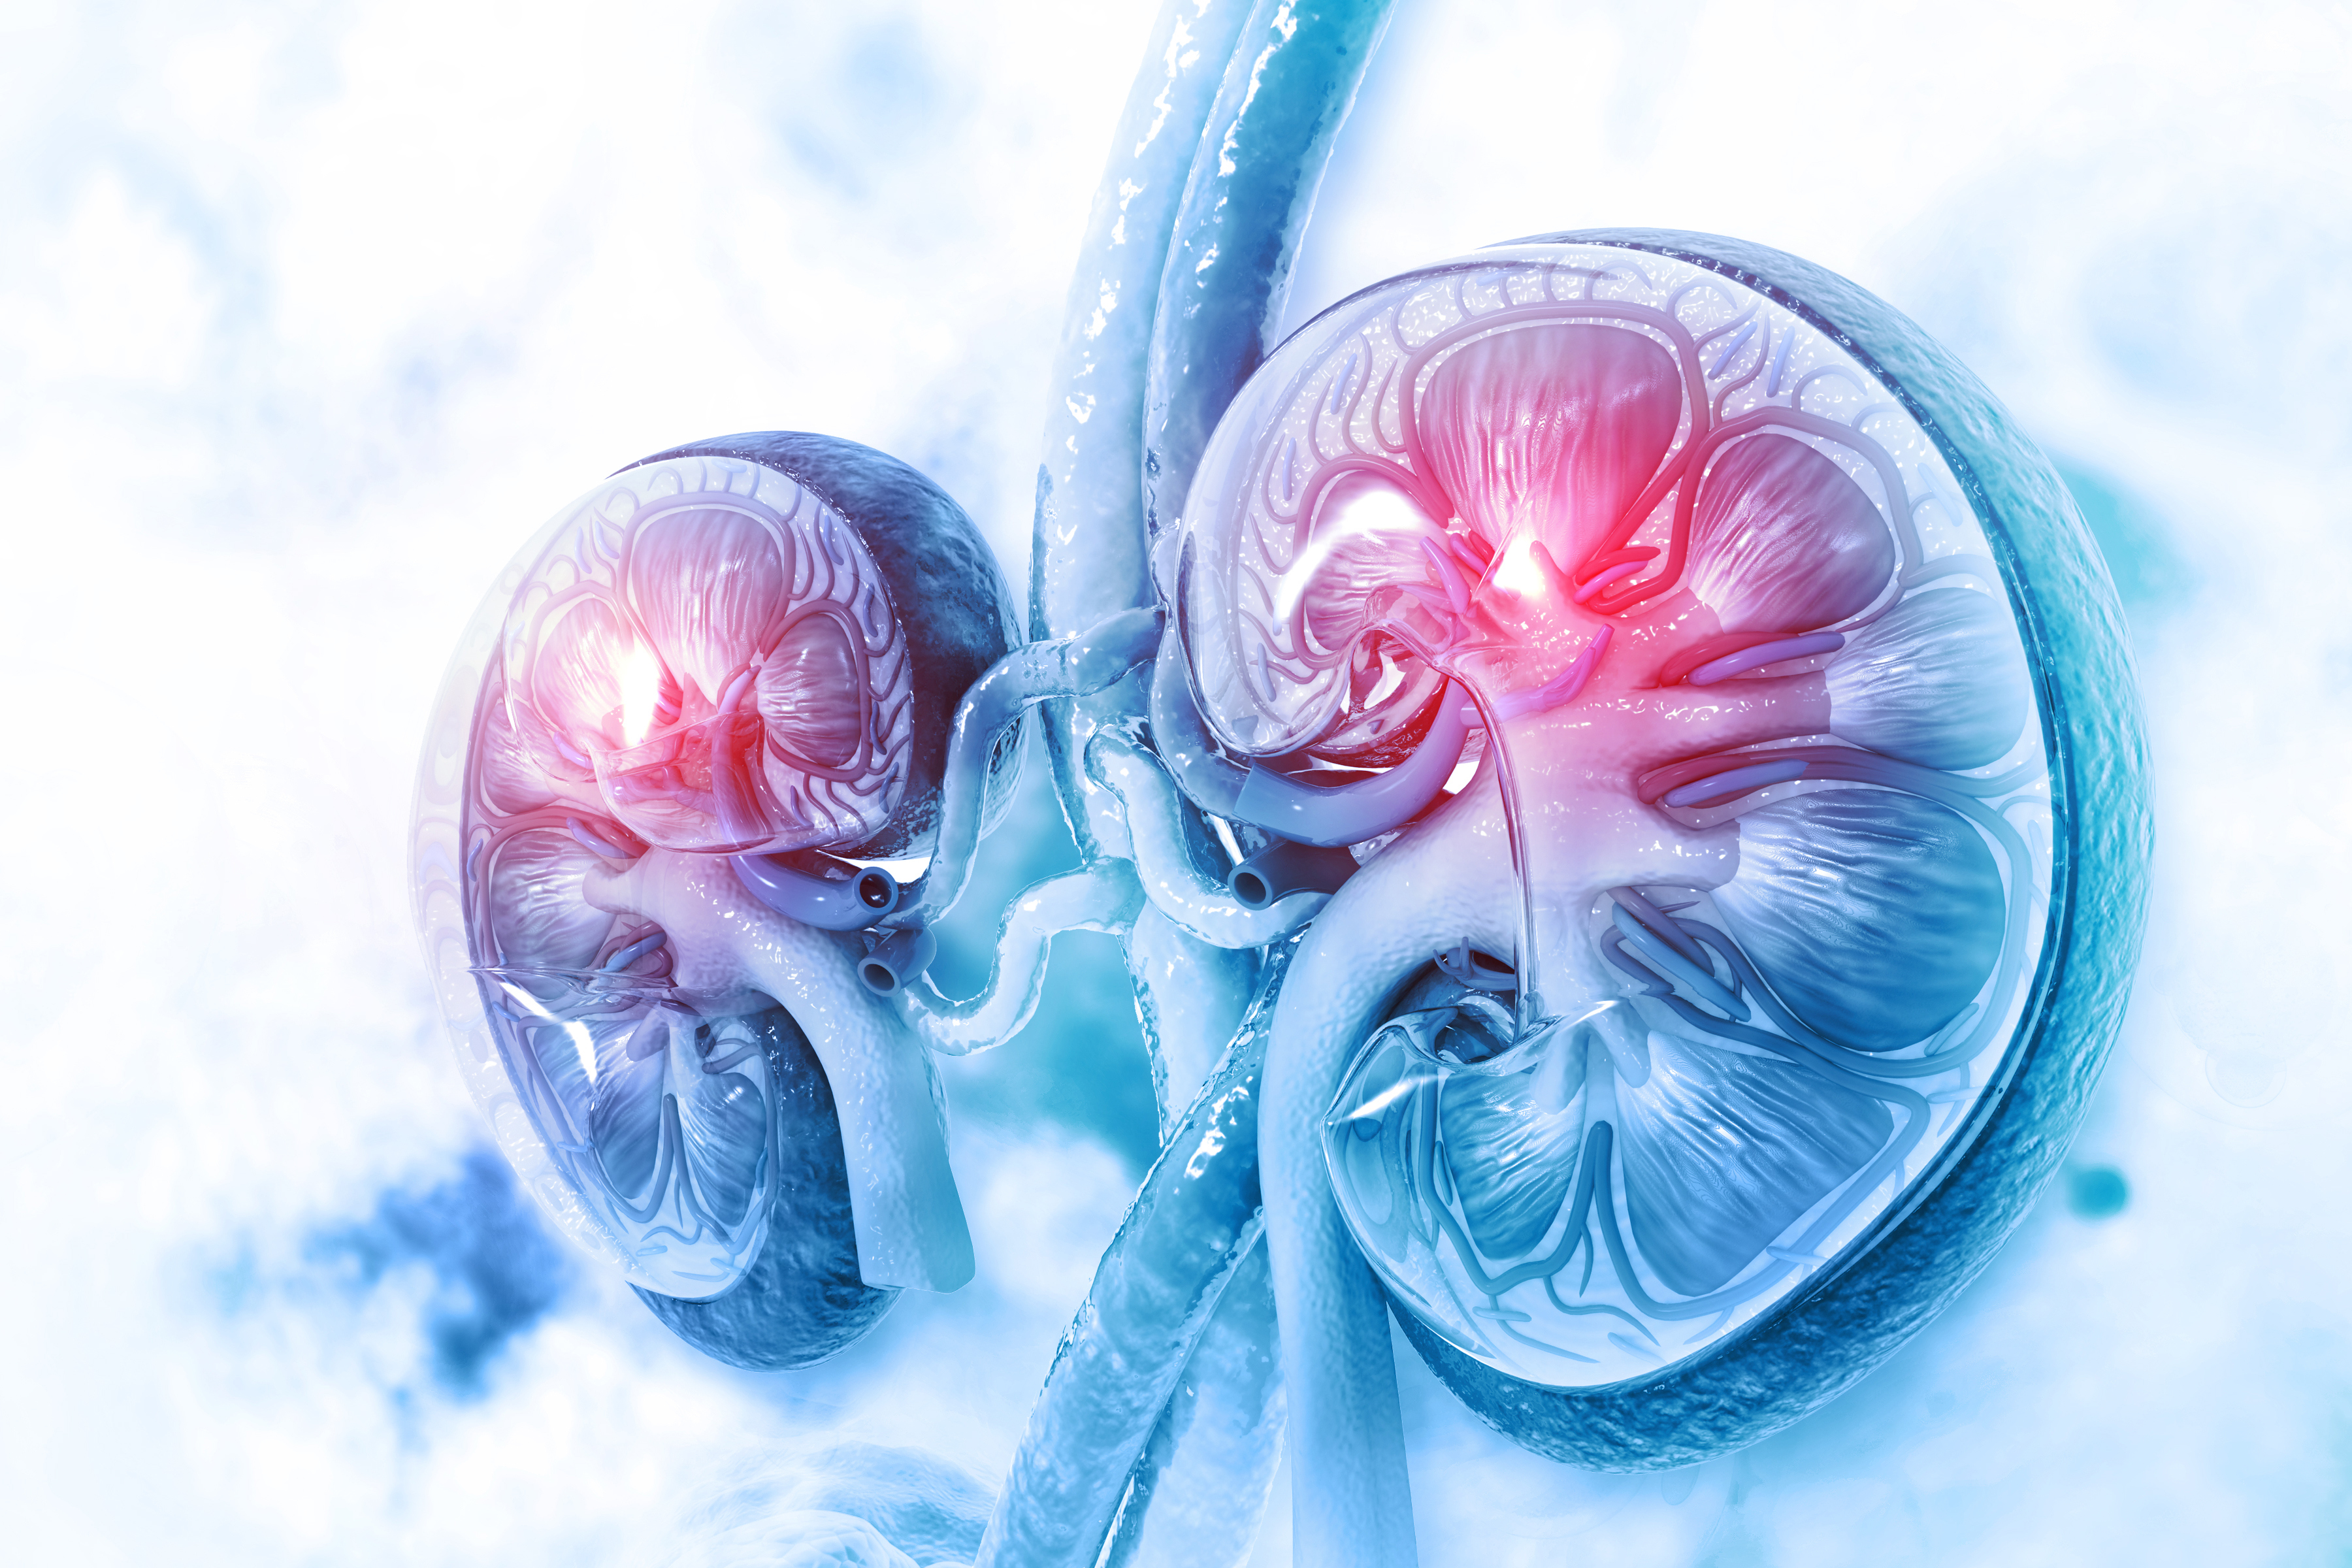 Increase in Renal Function Deterioration in the Critically Ill Patients